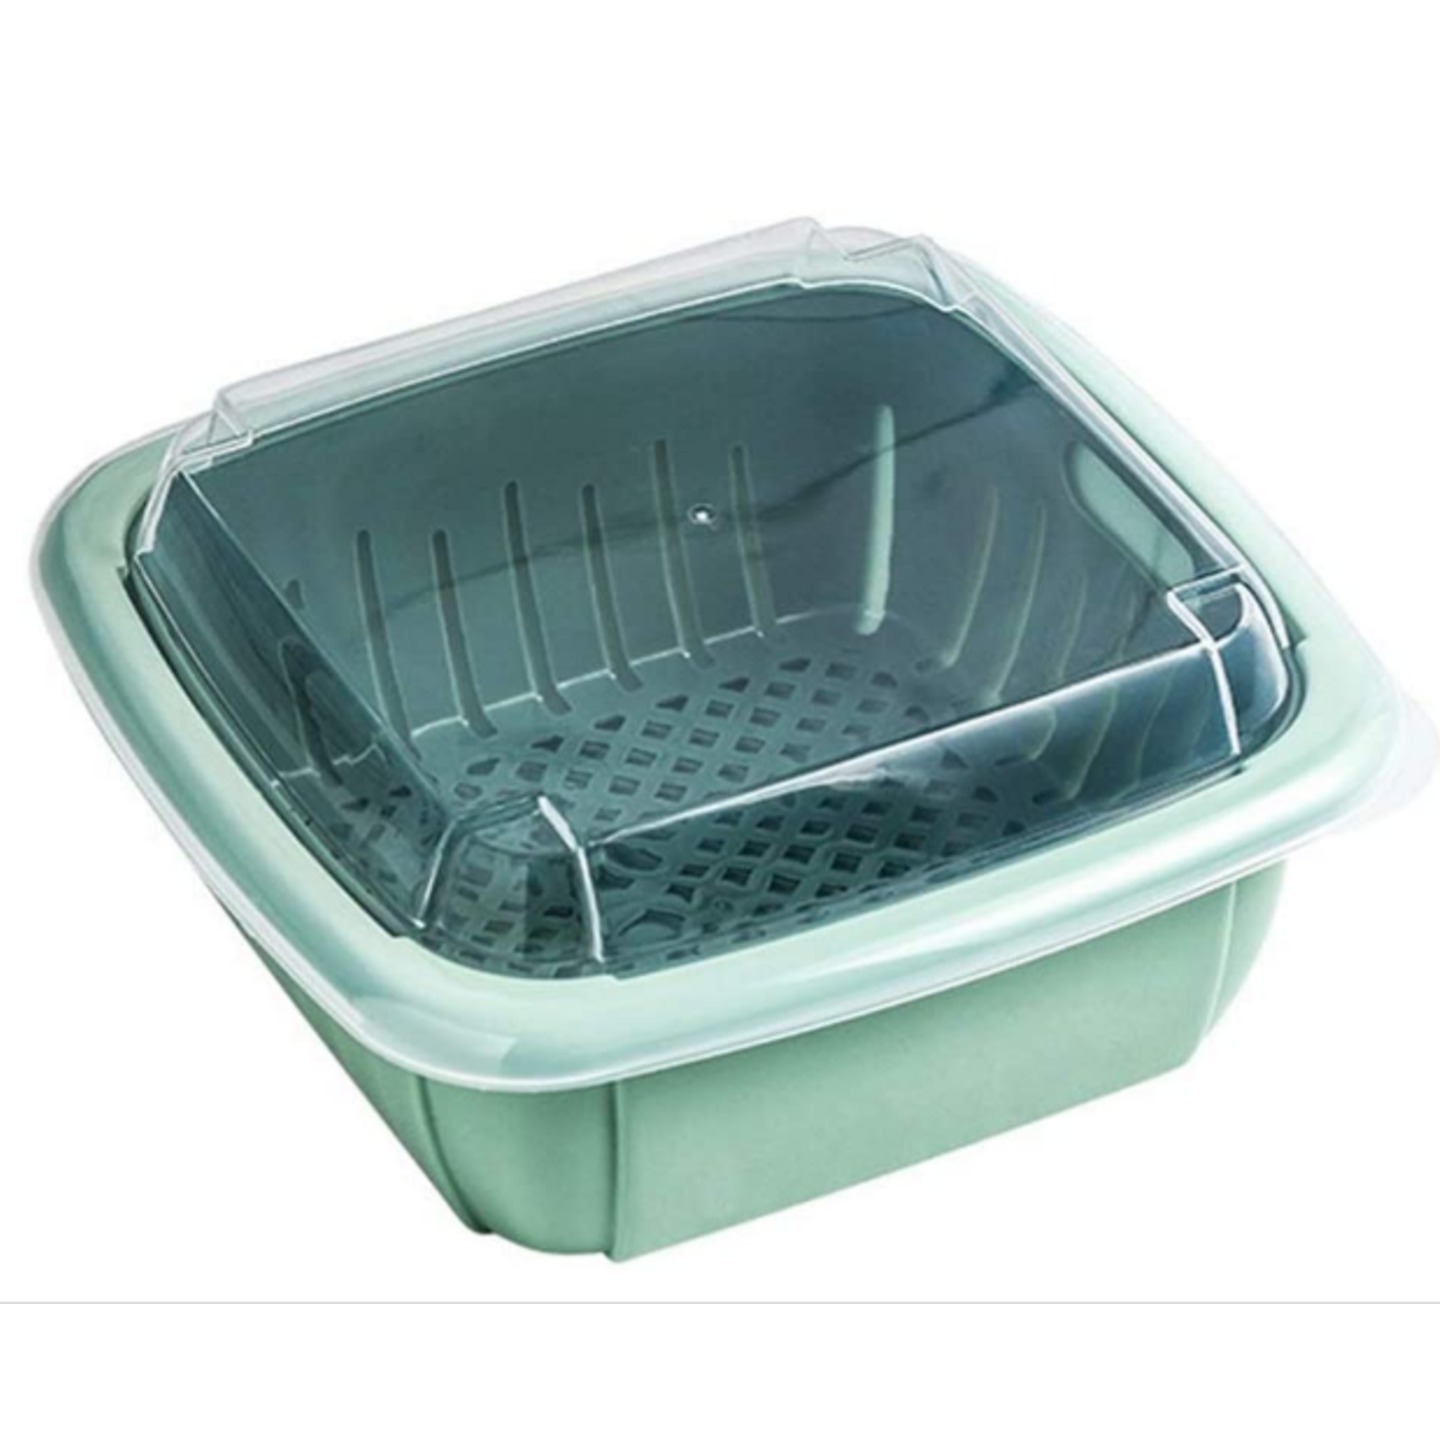 JonPrix 1 PC, Multifunction Double-Layer Drain Basket with Lid